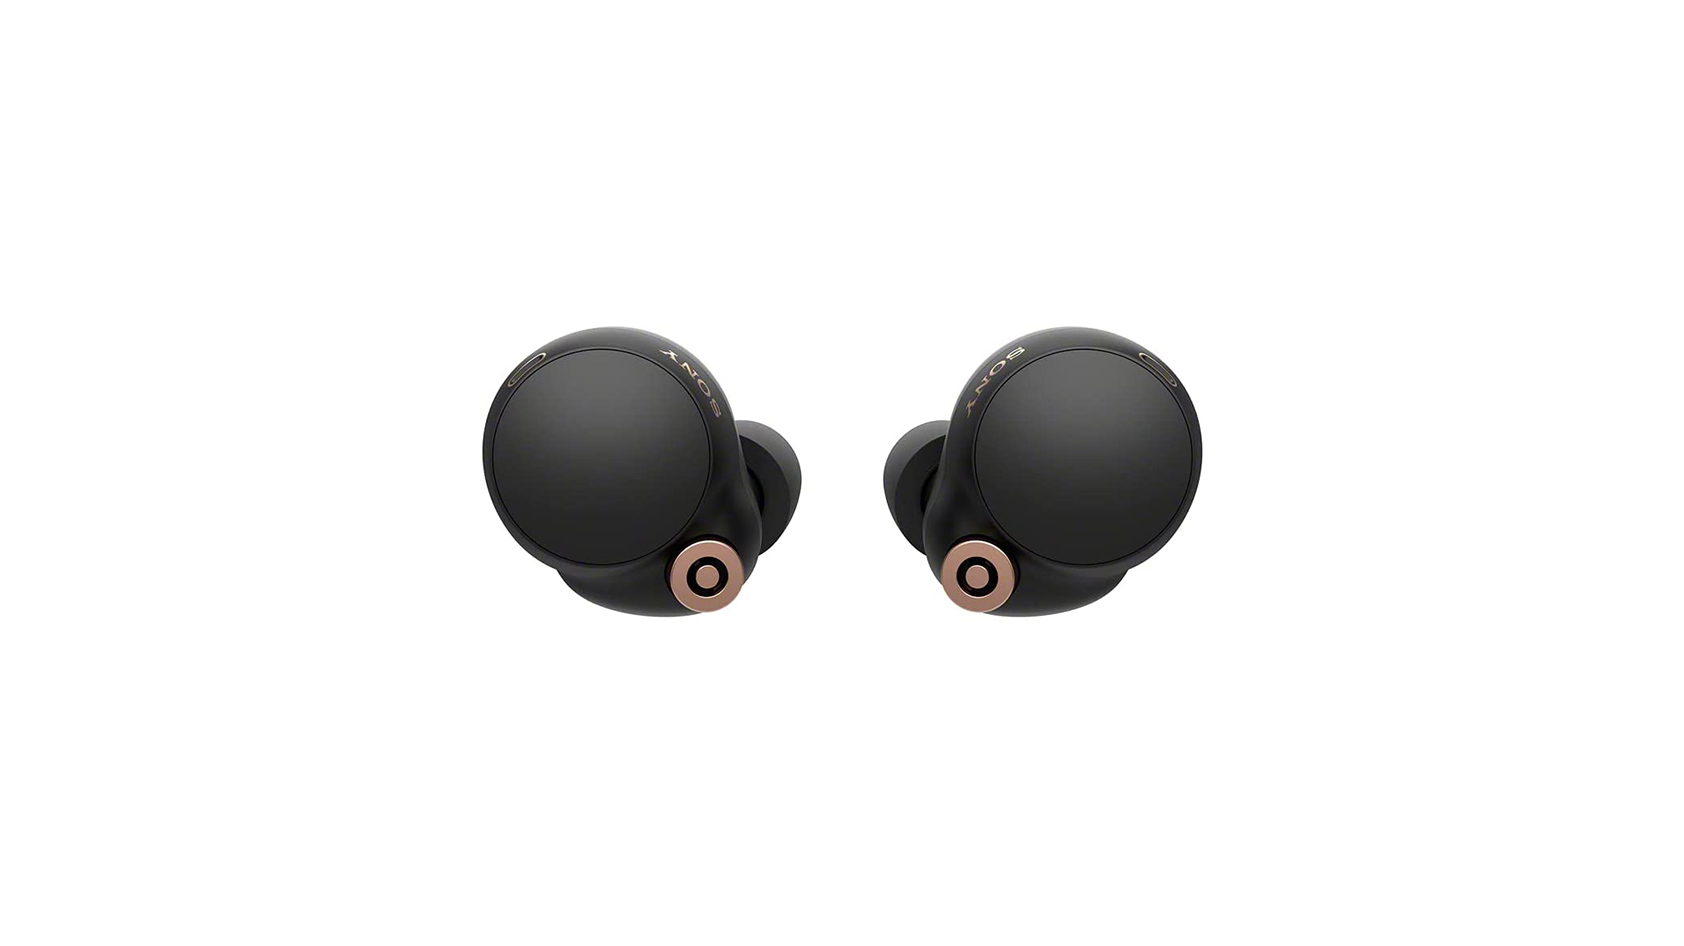 The Sony WF-1000XM4 noise-canceling true wireless earbuds in black against a white background.